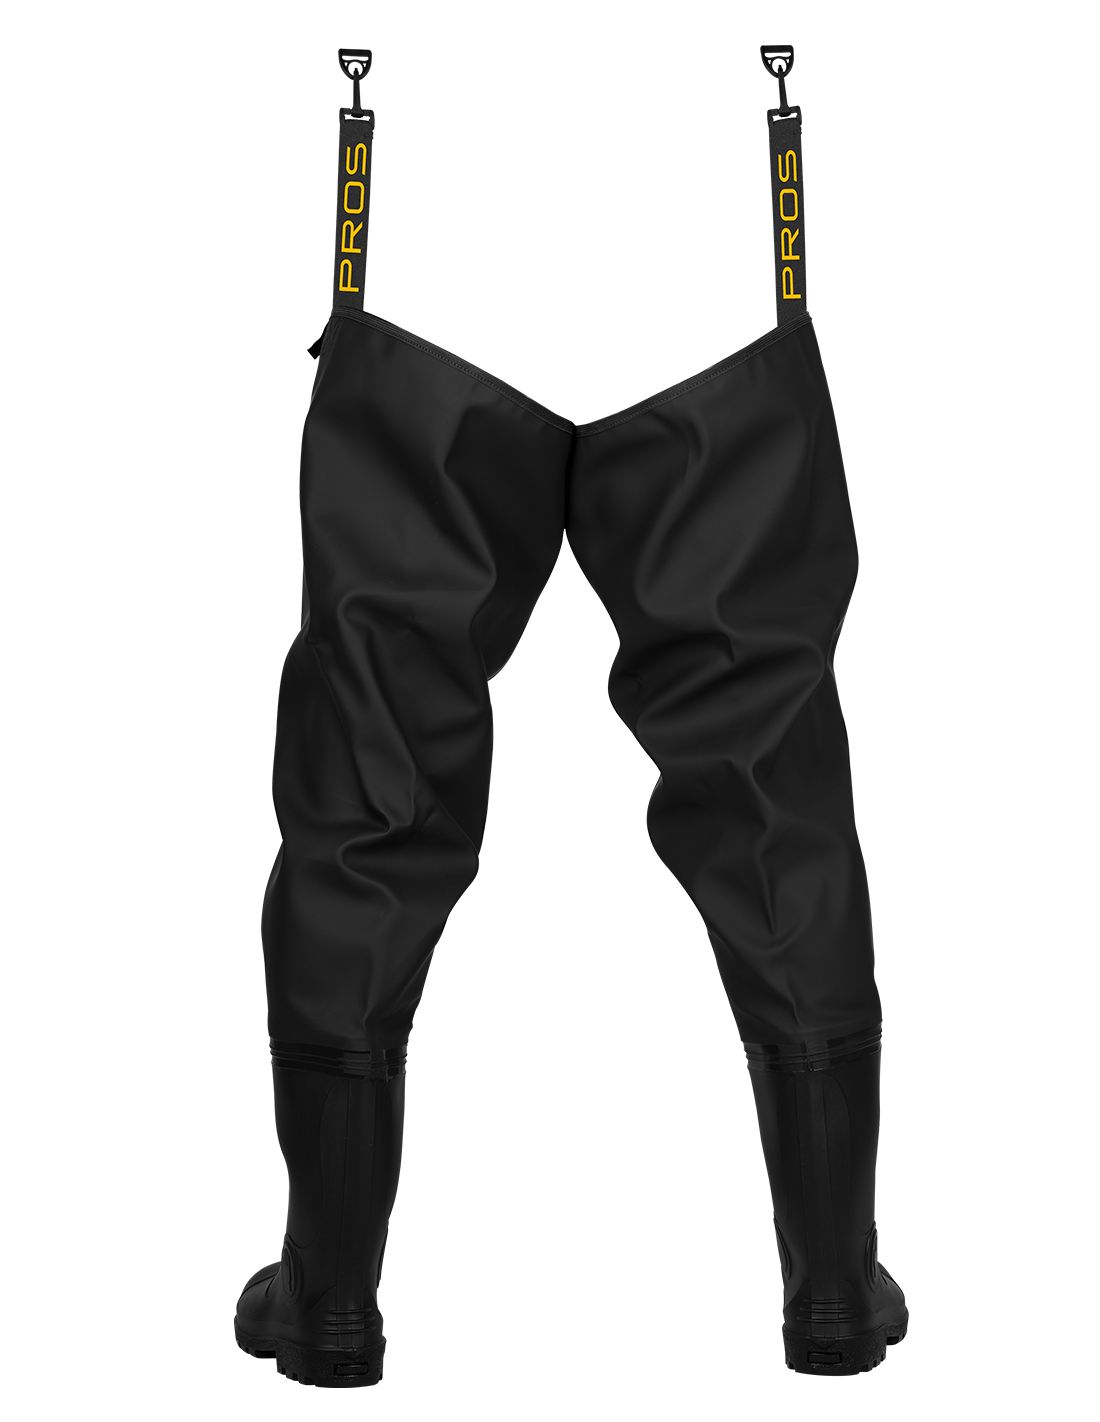 Thigh Waders - PROS